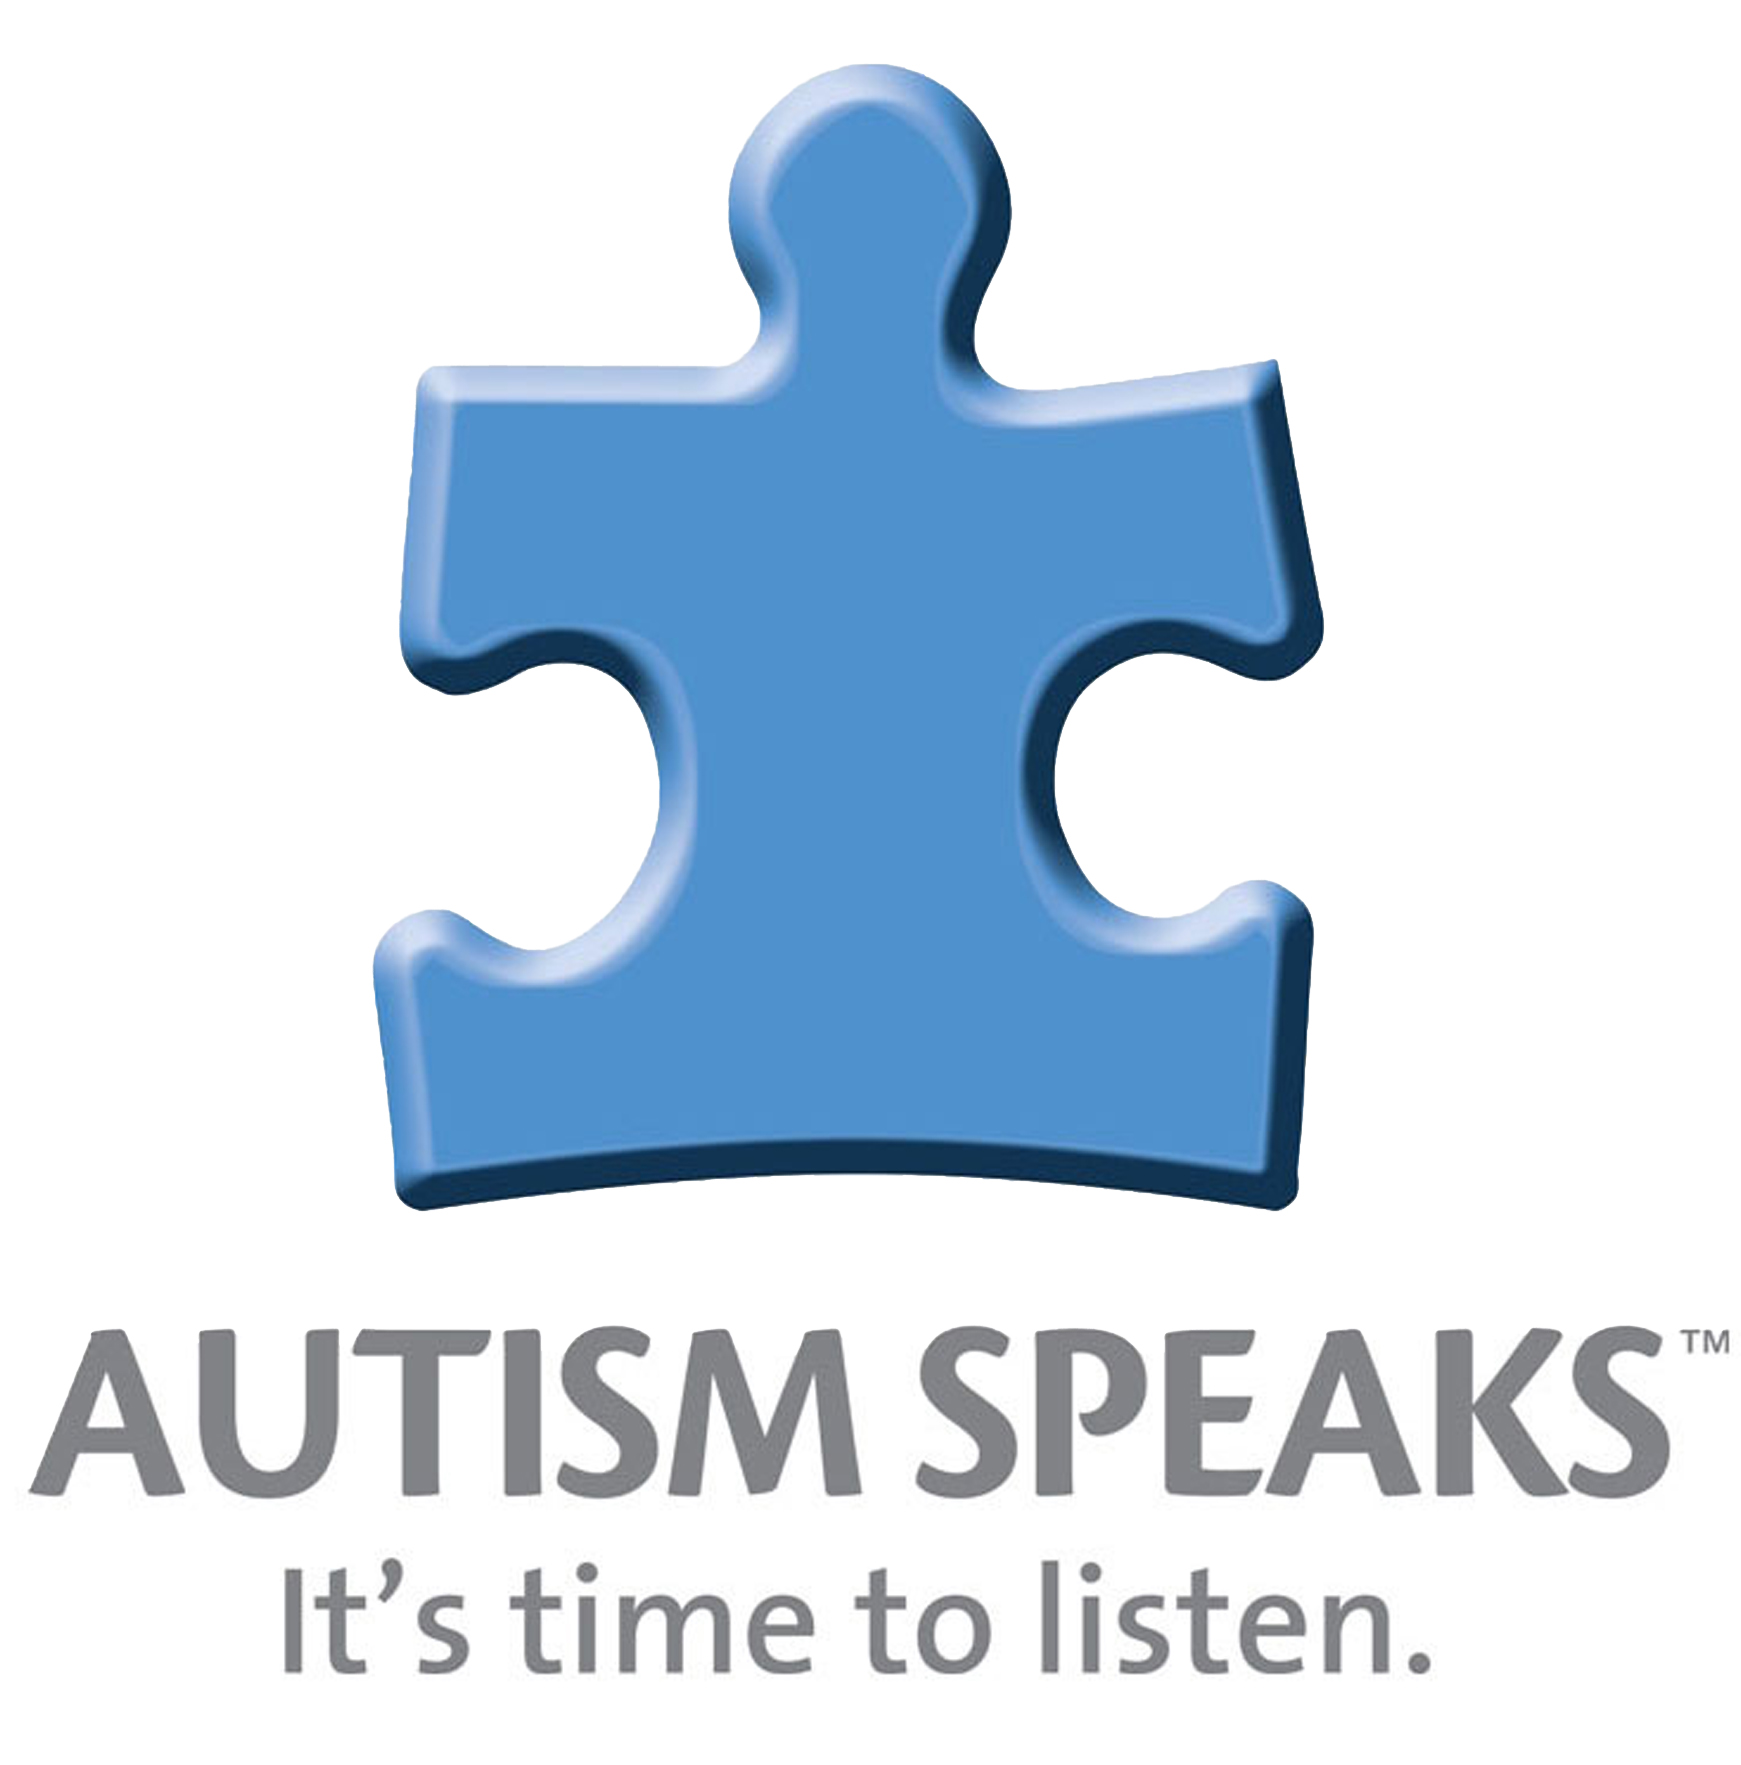 Autism Speaks was founded in 